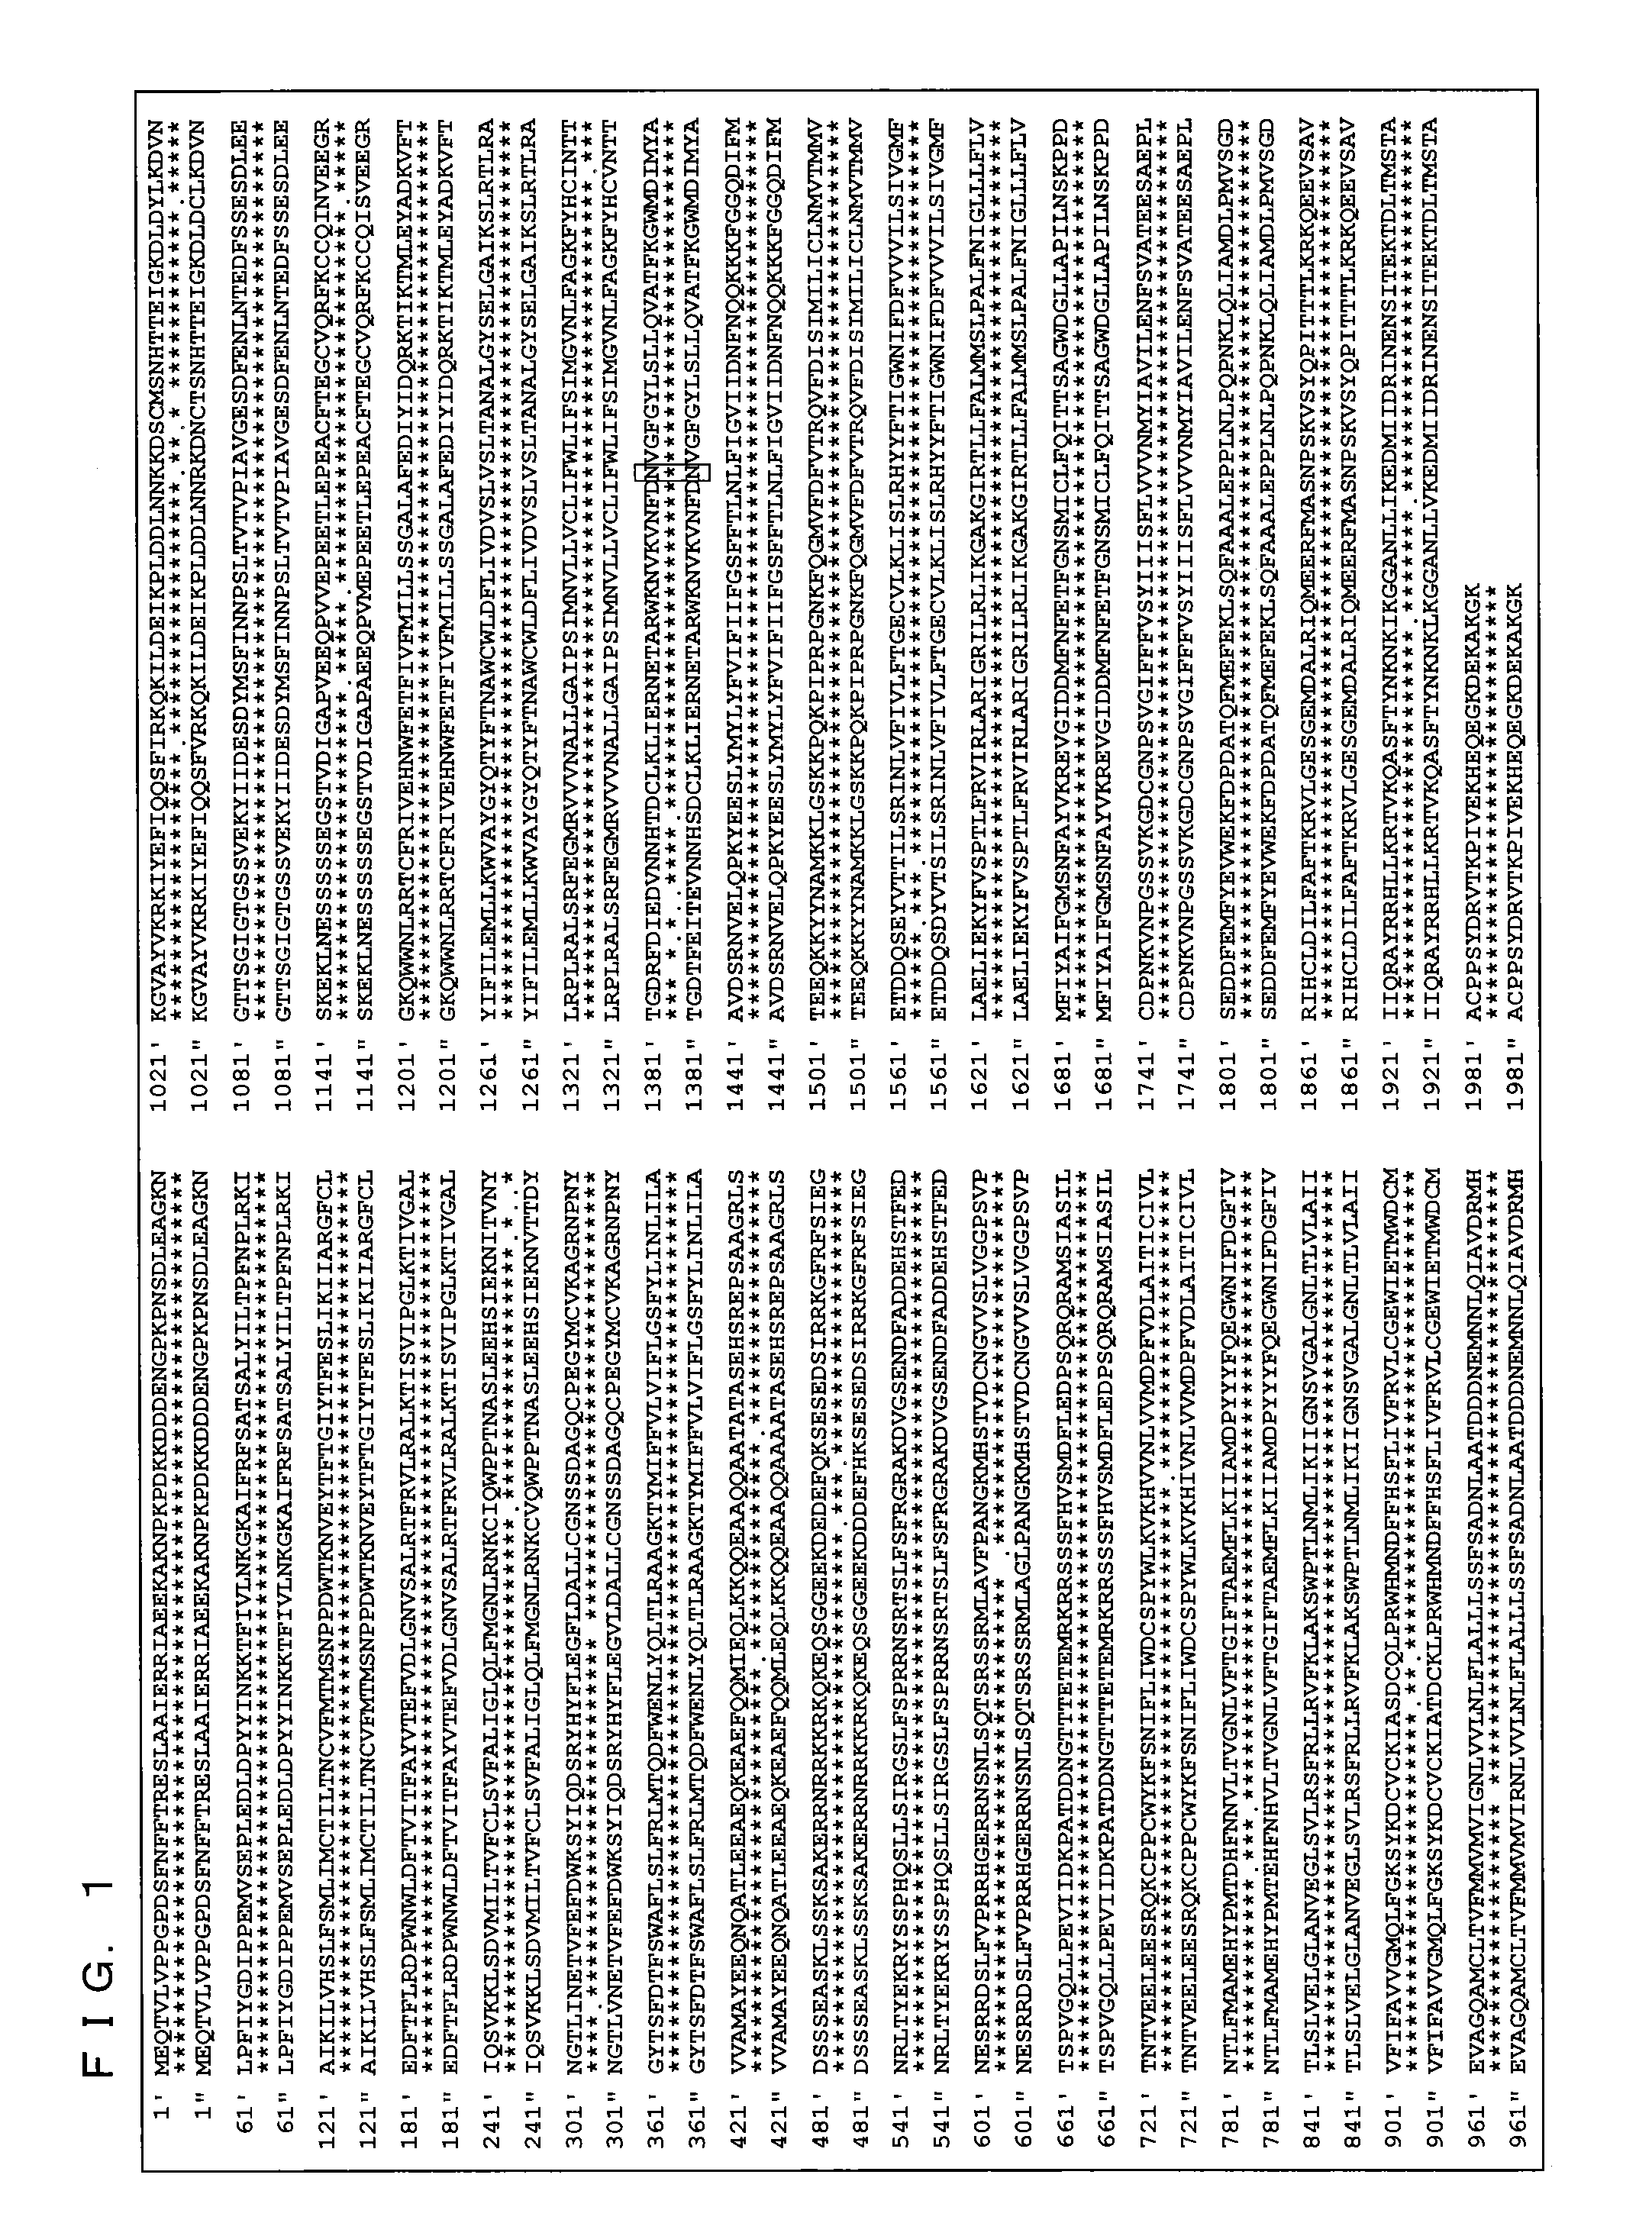 Method for assessment of potential for development of dravet syndrome and use thereof